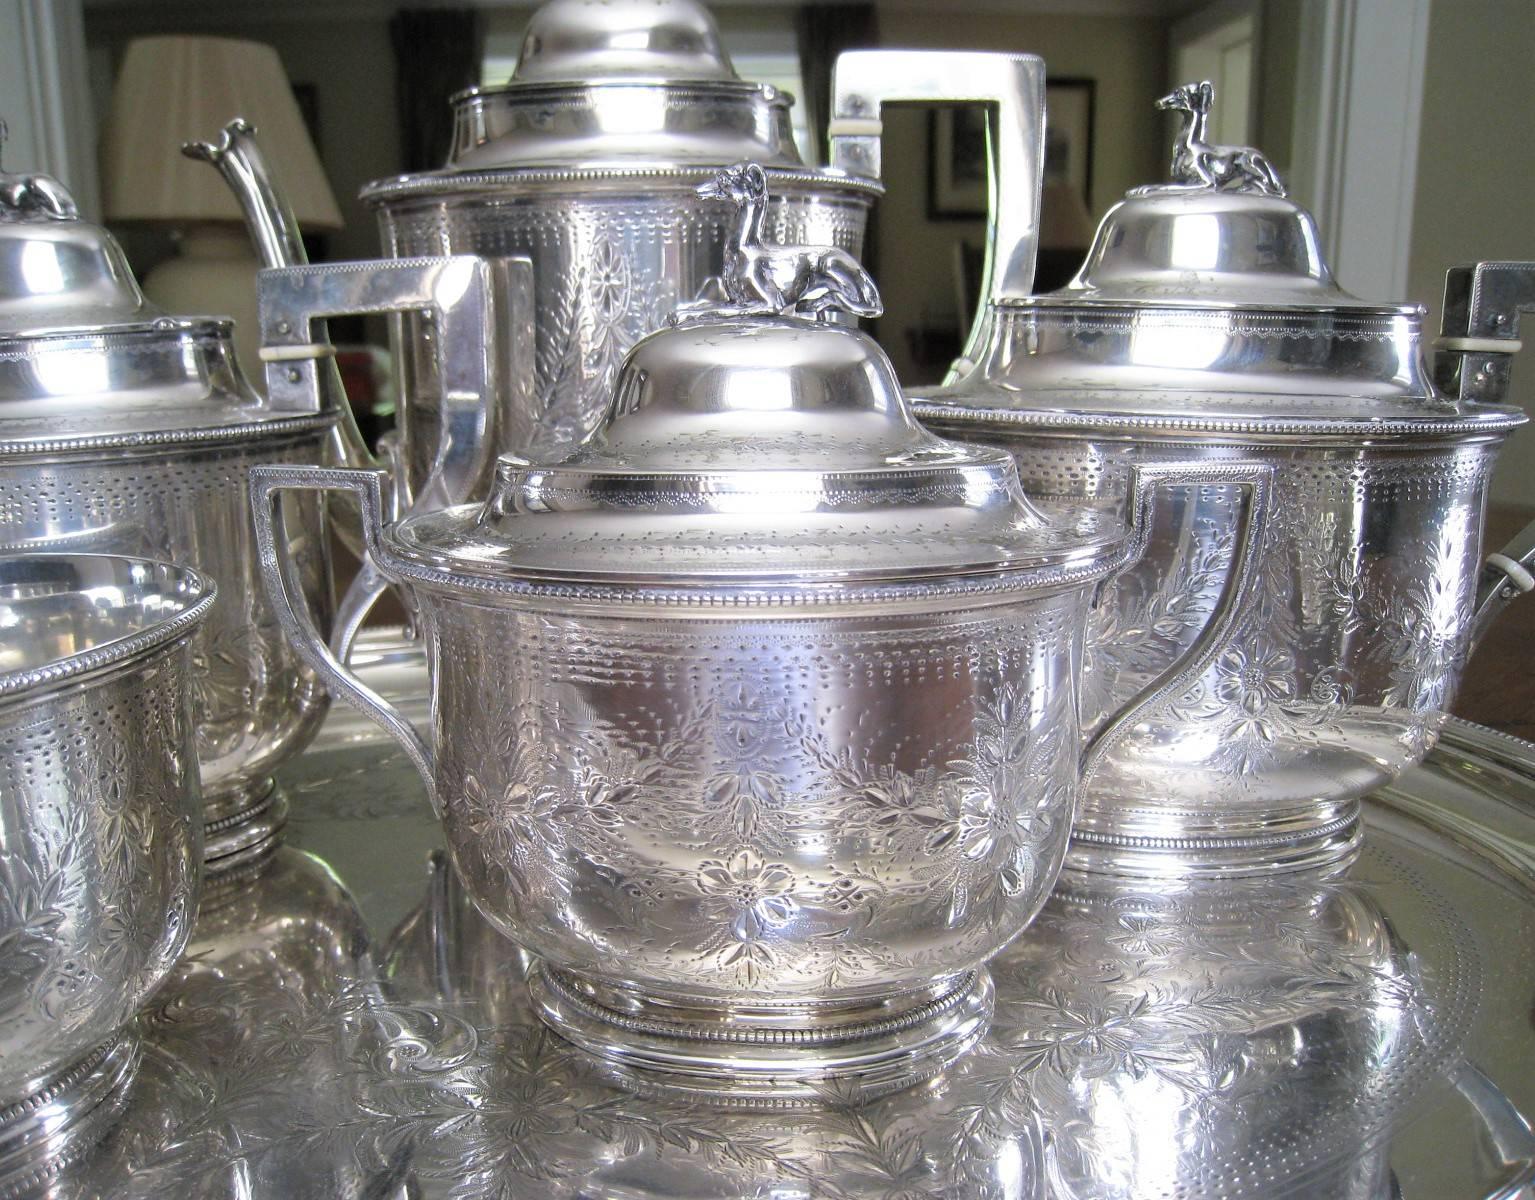 Beautiful antique seven-piece coin silver tea set made by Augustus Rogers & John Wendt, circa 1850 along with a matching silver plated tray. The eight-piece set consists of seven coin silver pieces; coffee pot, two tea pots, covered sugar, creamer,